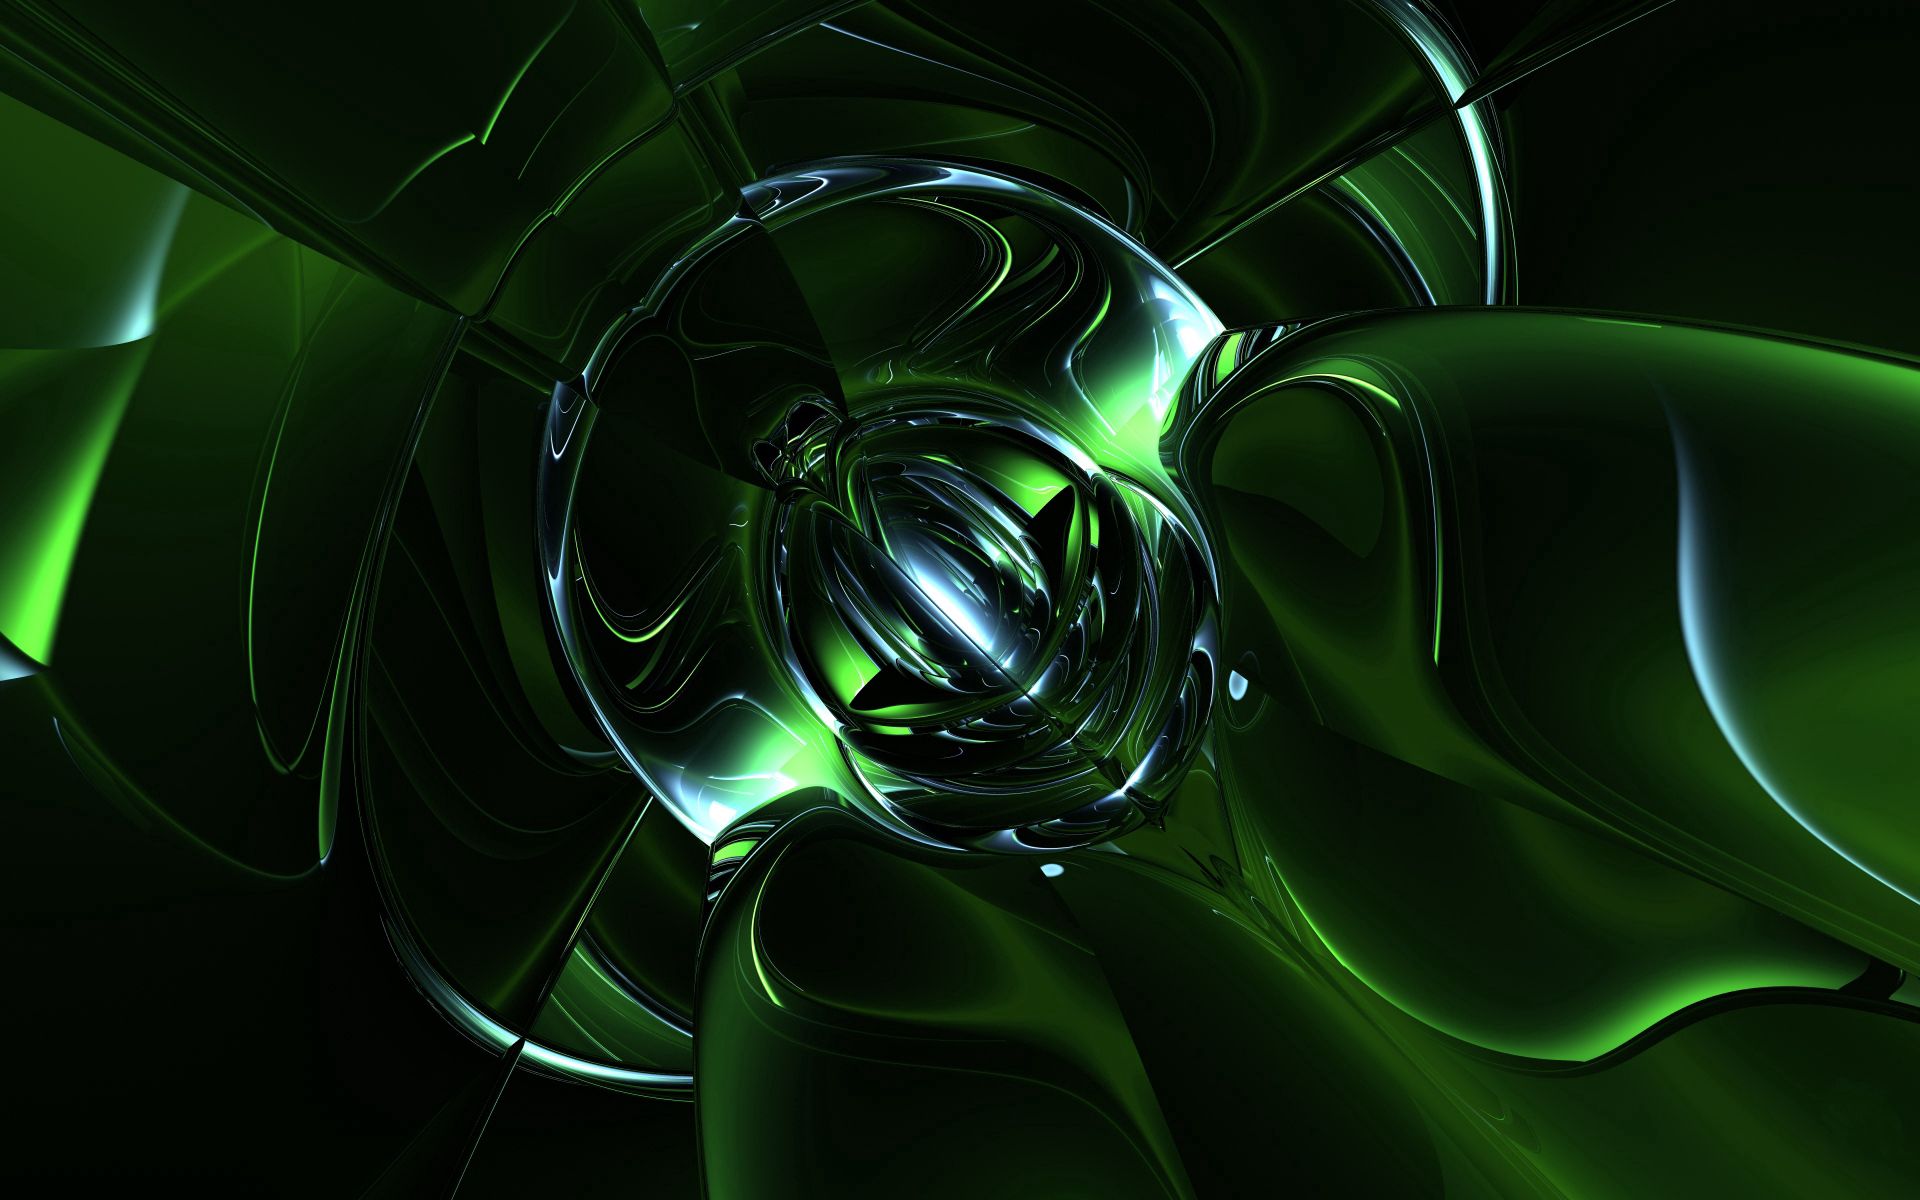 Widescreen image immersion, plexus, abstract, compound